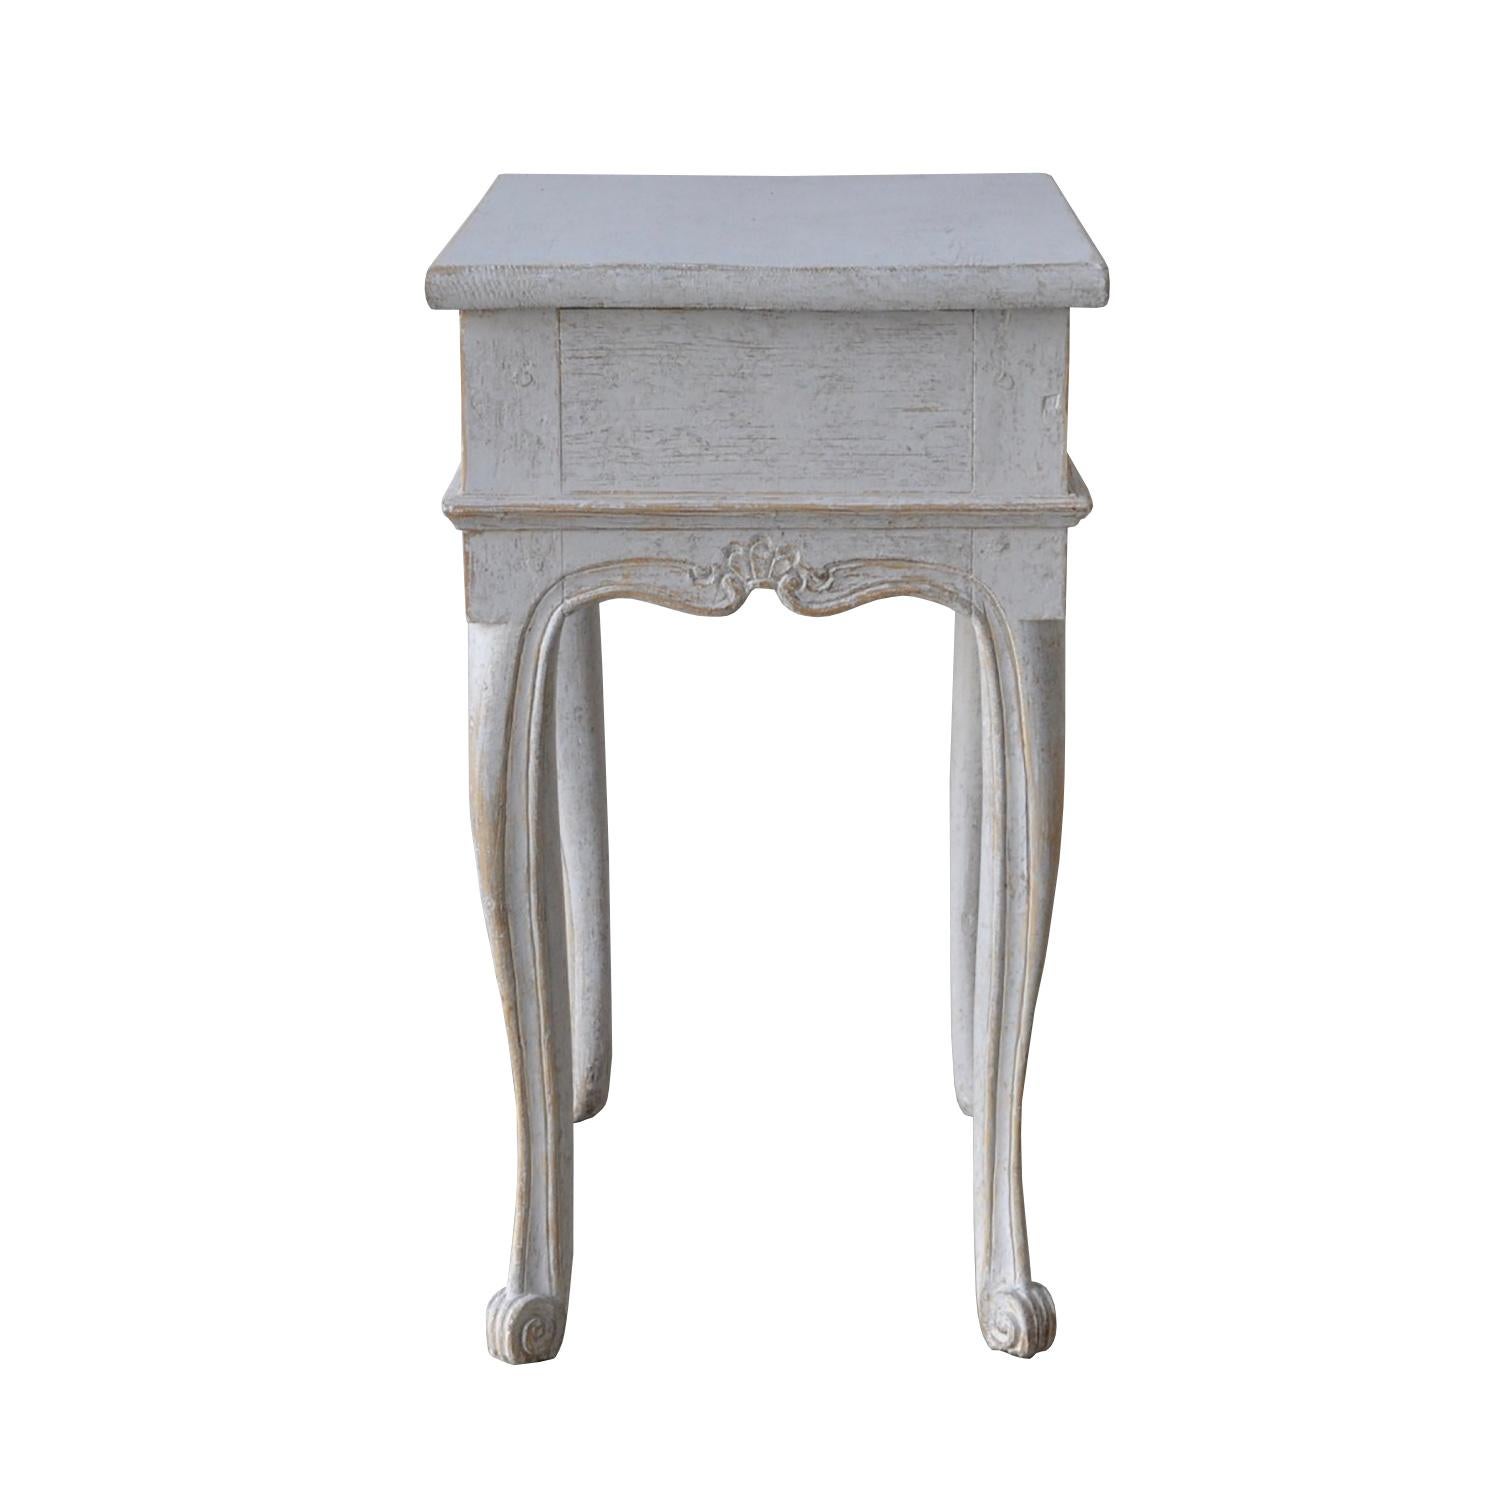 A period Rococo table with cabriolet legs, a single drawer, and a decorative carved stretcher. This piece has been repainted.